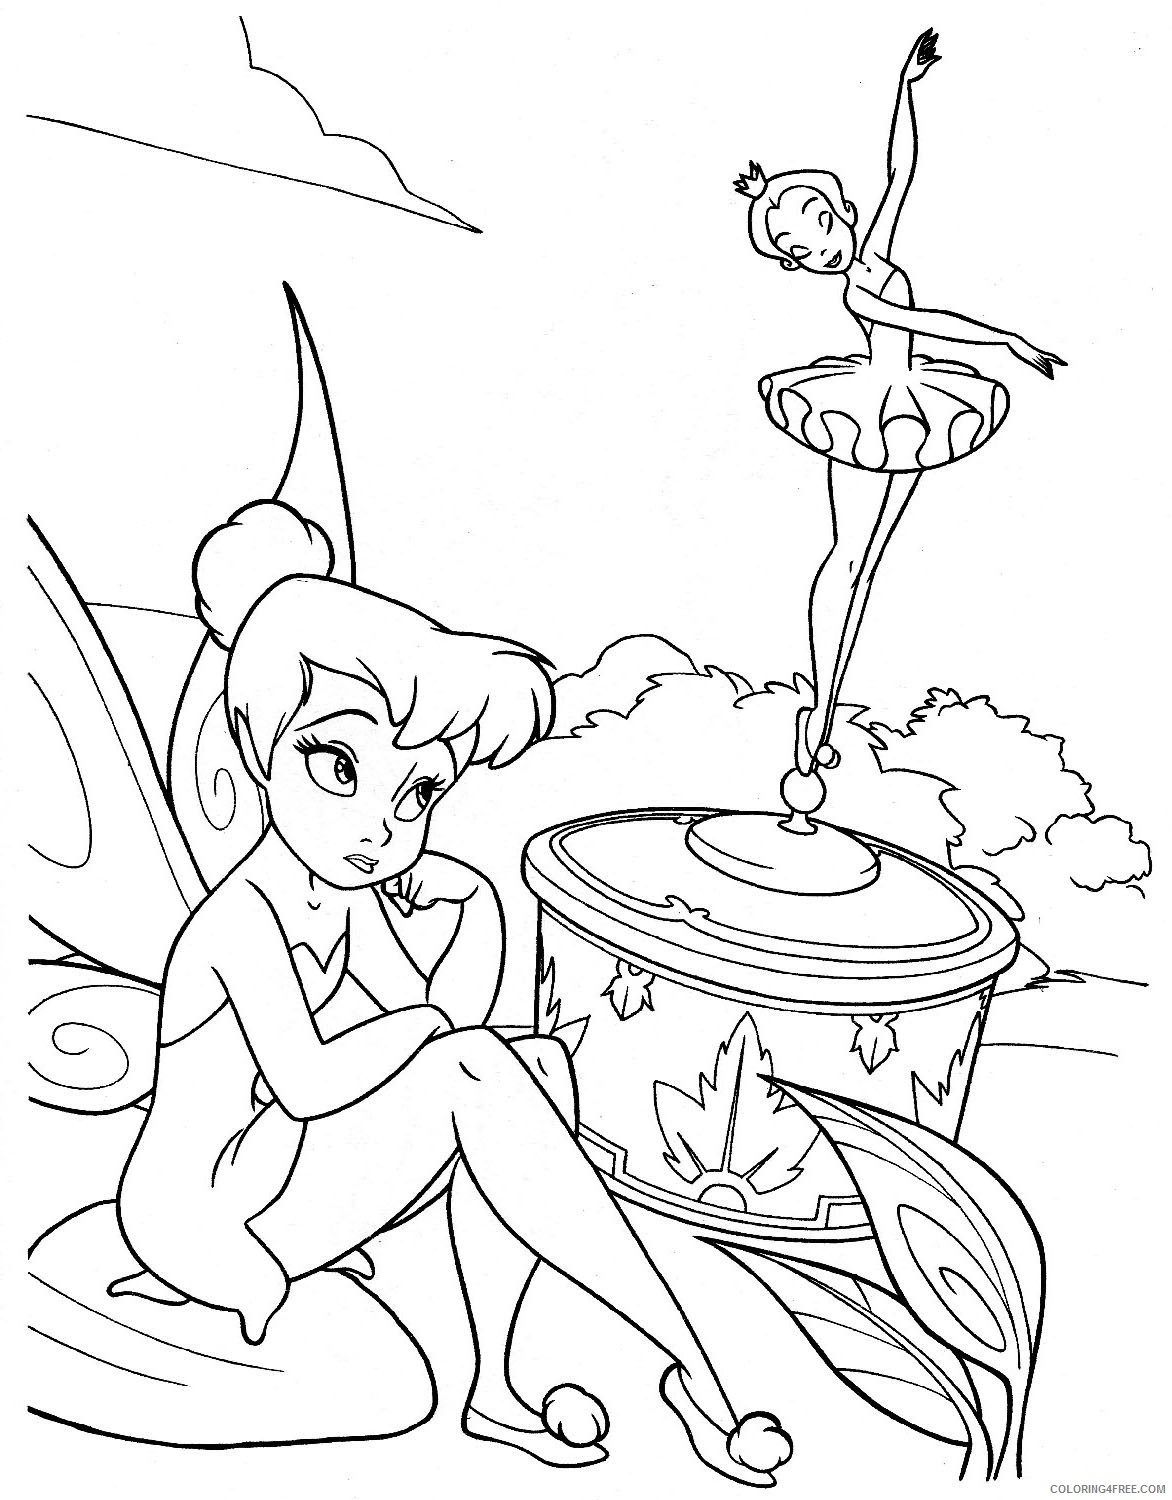 Tinker Bell Coloring Pages Cartoons Tinkerbell Free Printable 2020 6678 Coloring4free